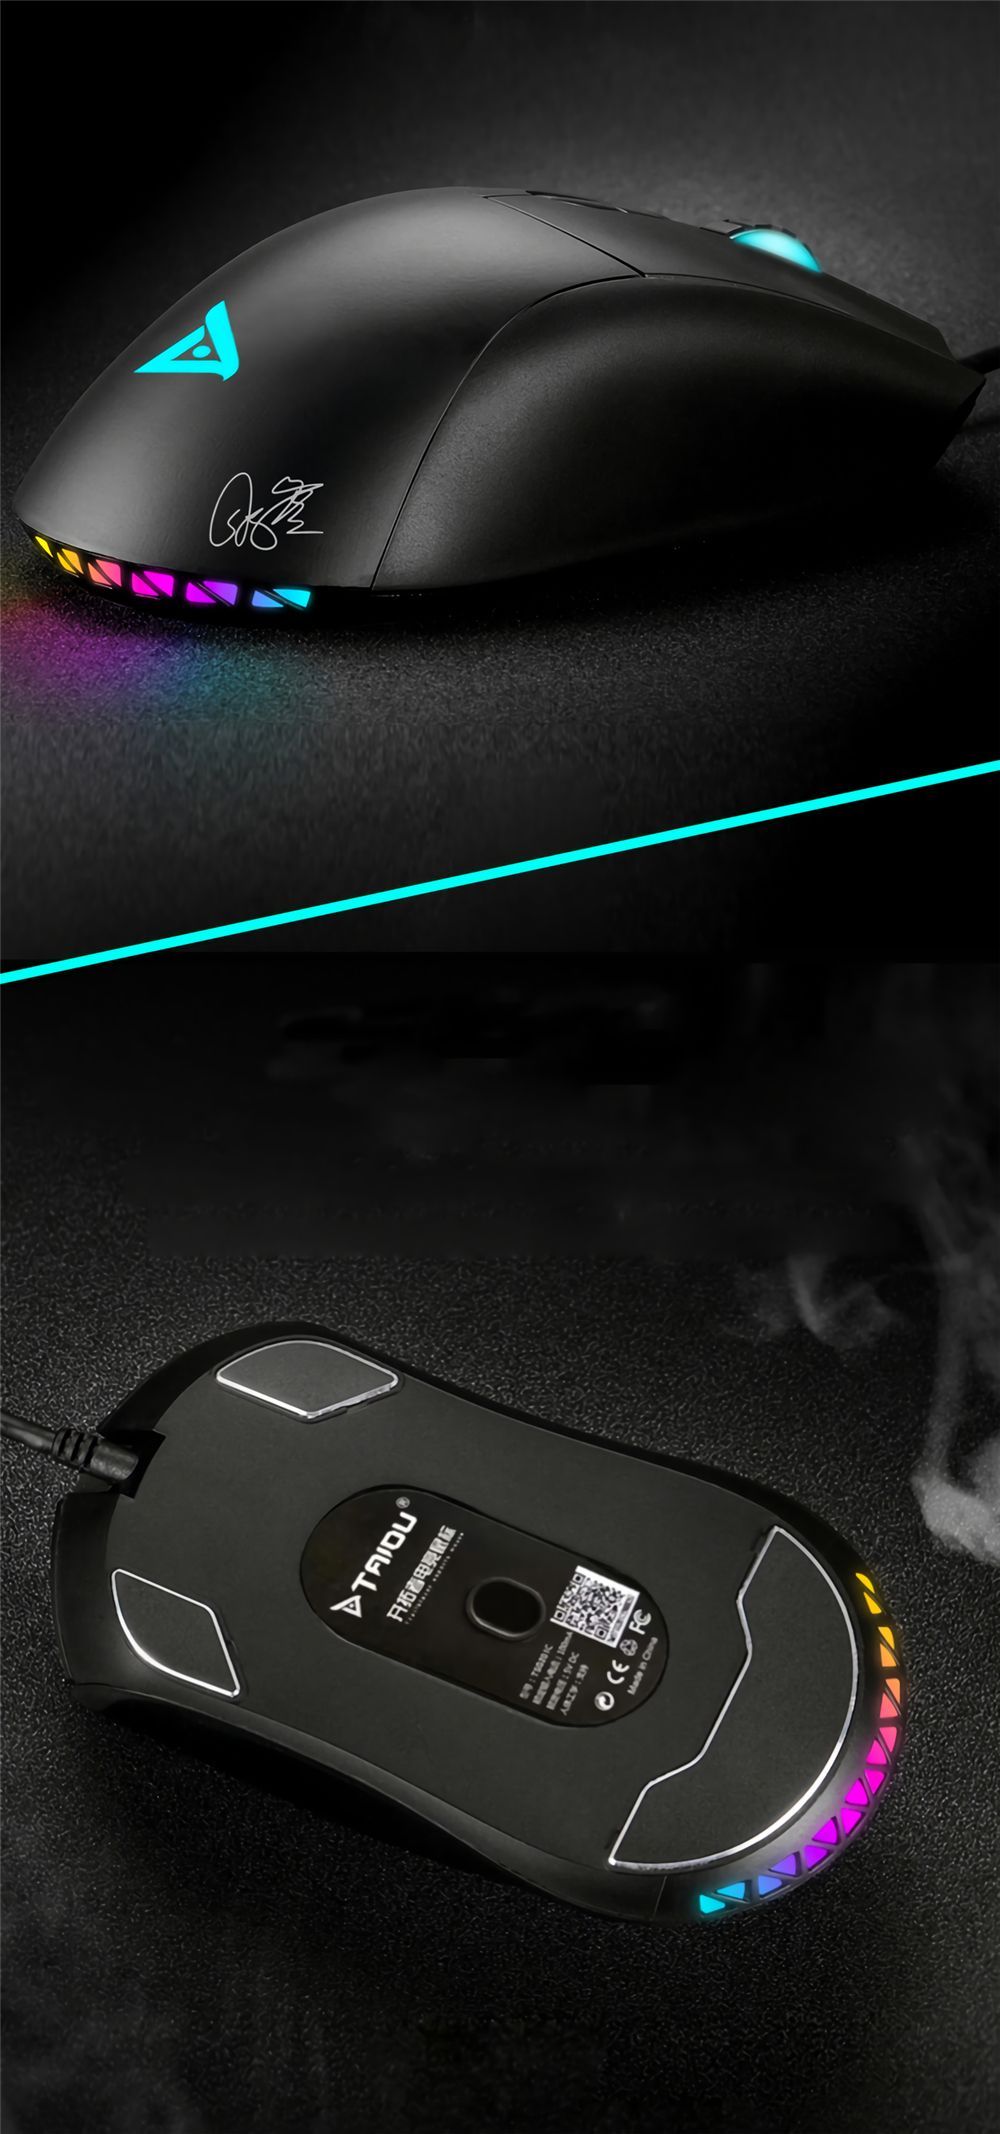 TAIDU-TSG201-Wired-Gaming-Mouse-RGB-Backlight-5000DPI-Macro-Programming-USB-Wired-Gamer-Mice-1700927